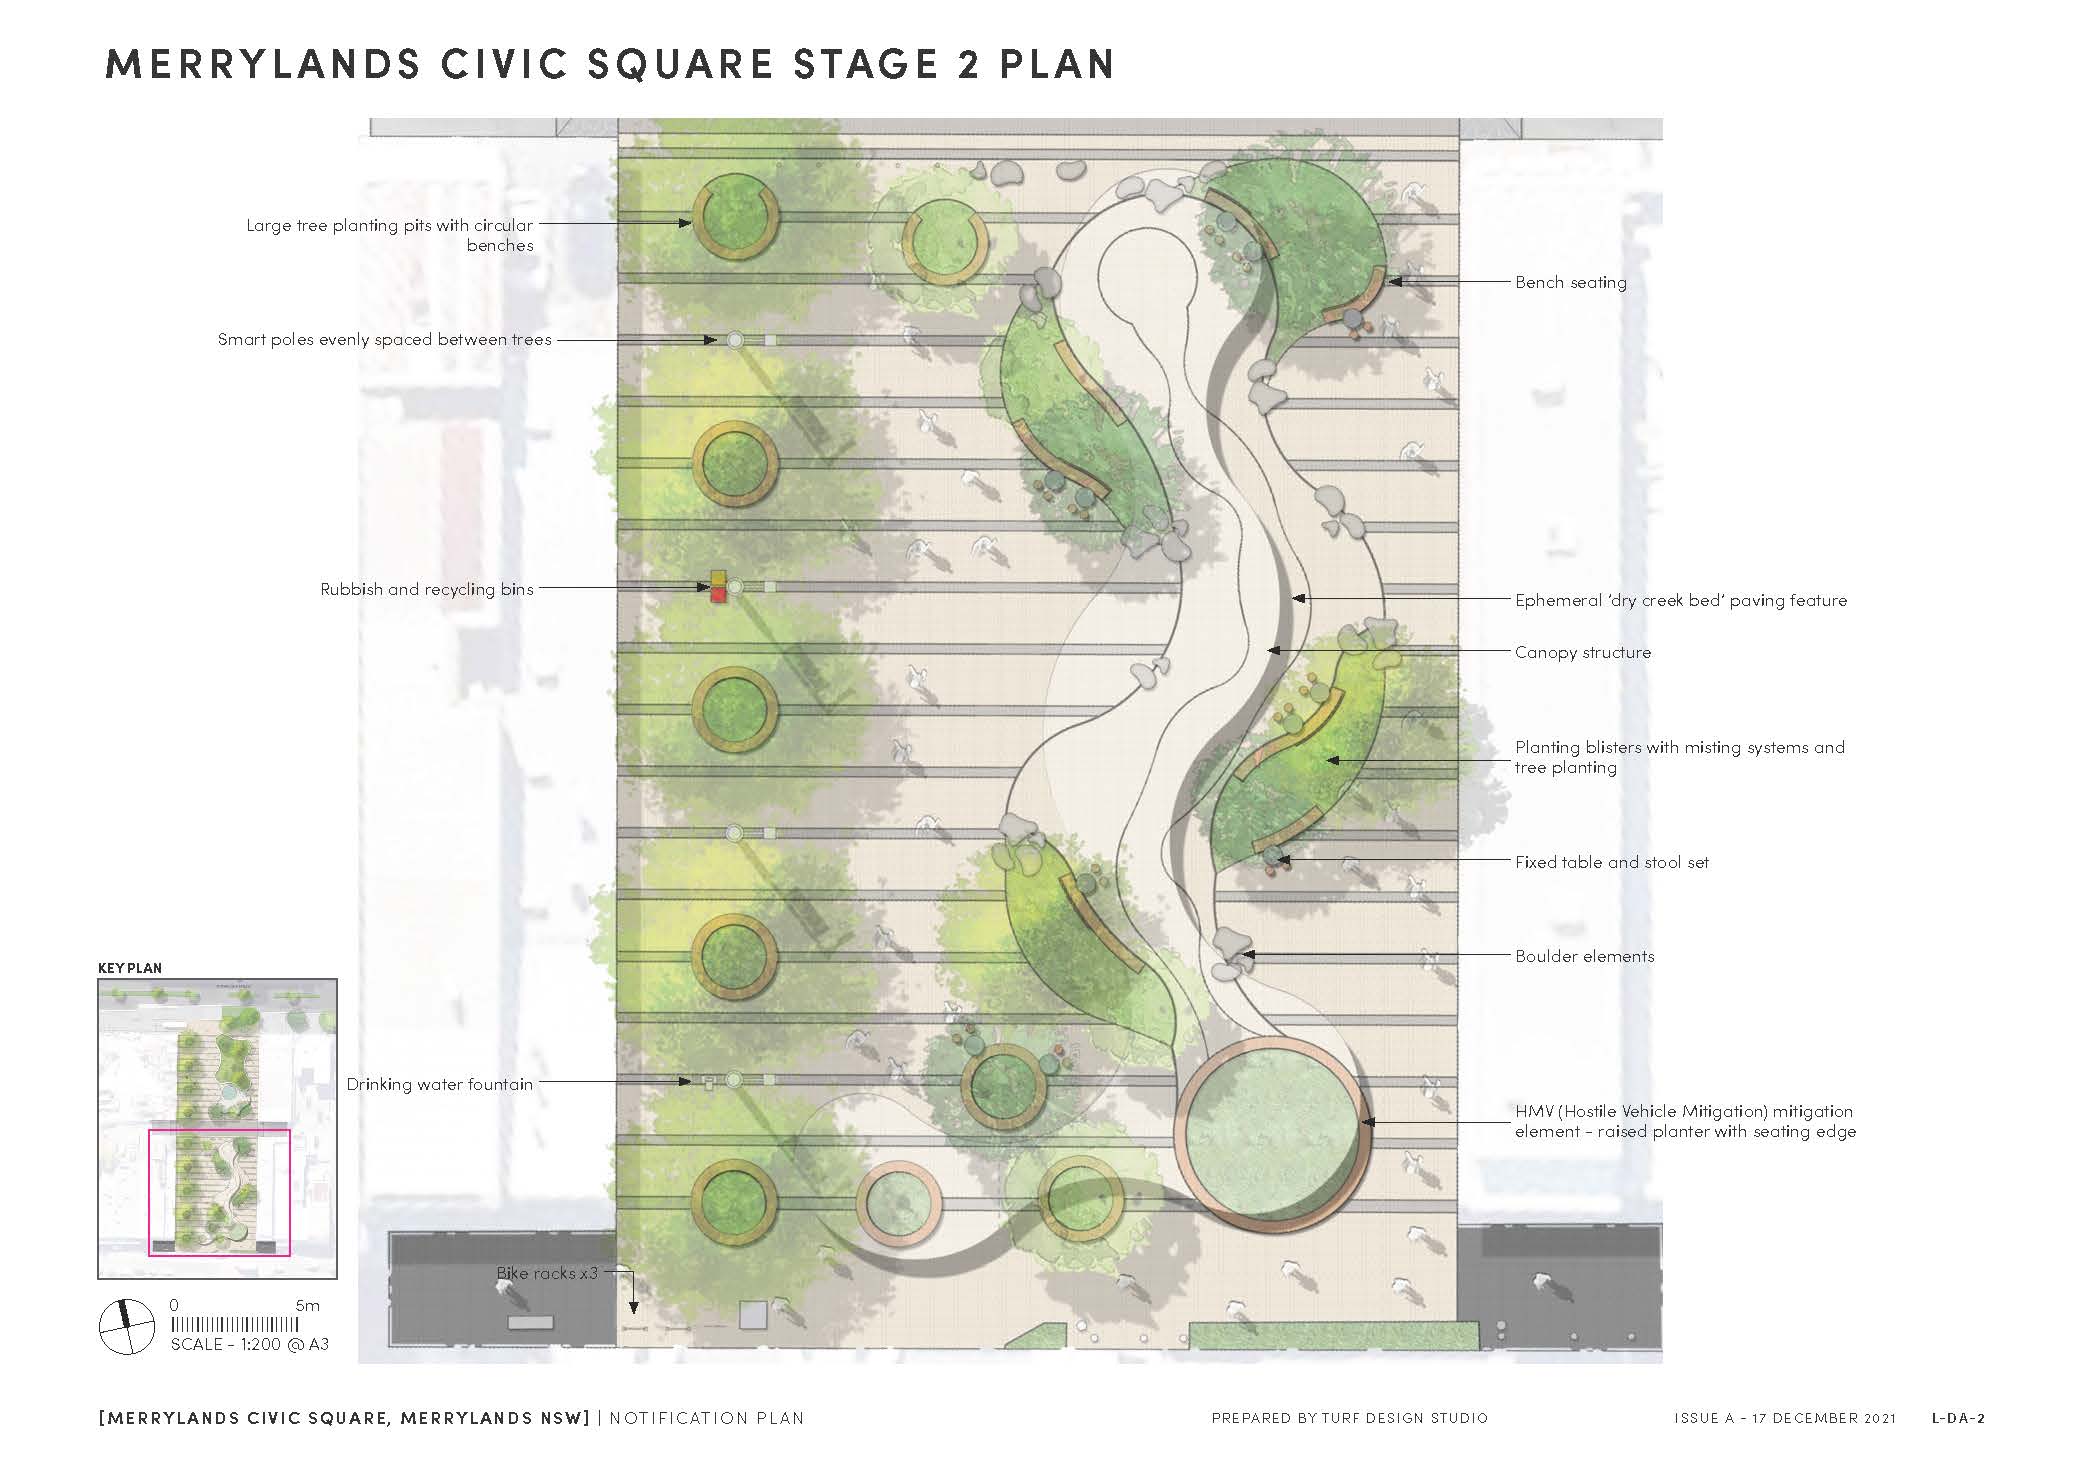 Plan for the proposed Merrylands Civic Square plan - Stage 2